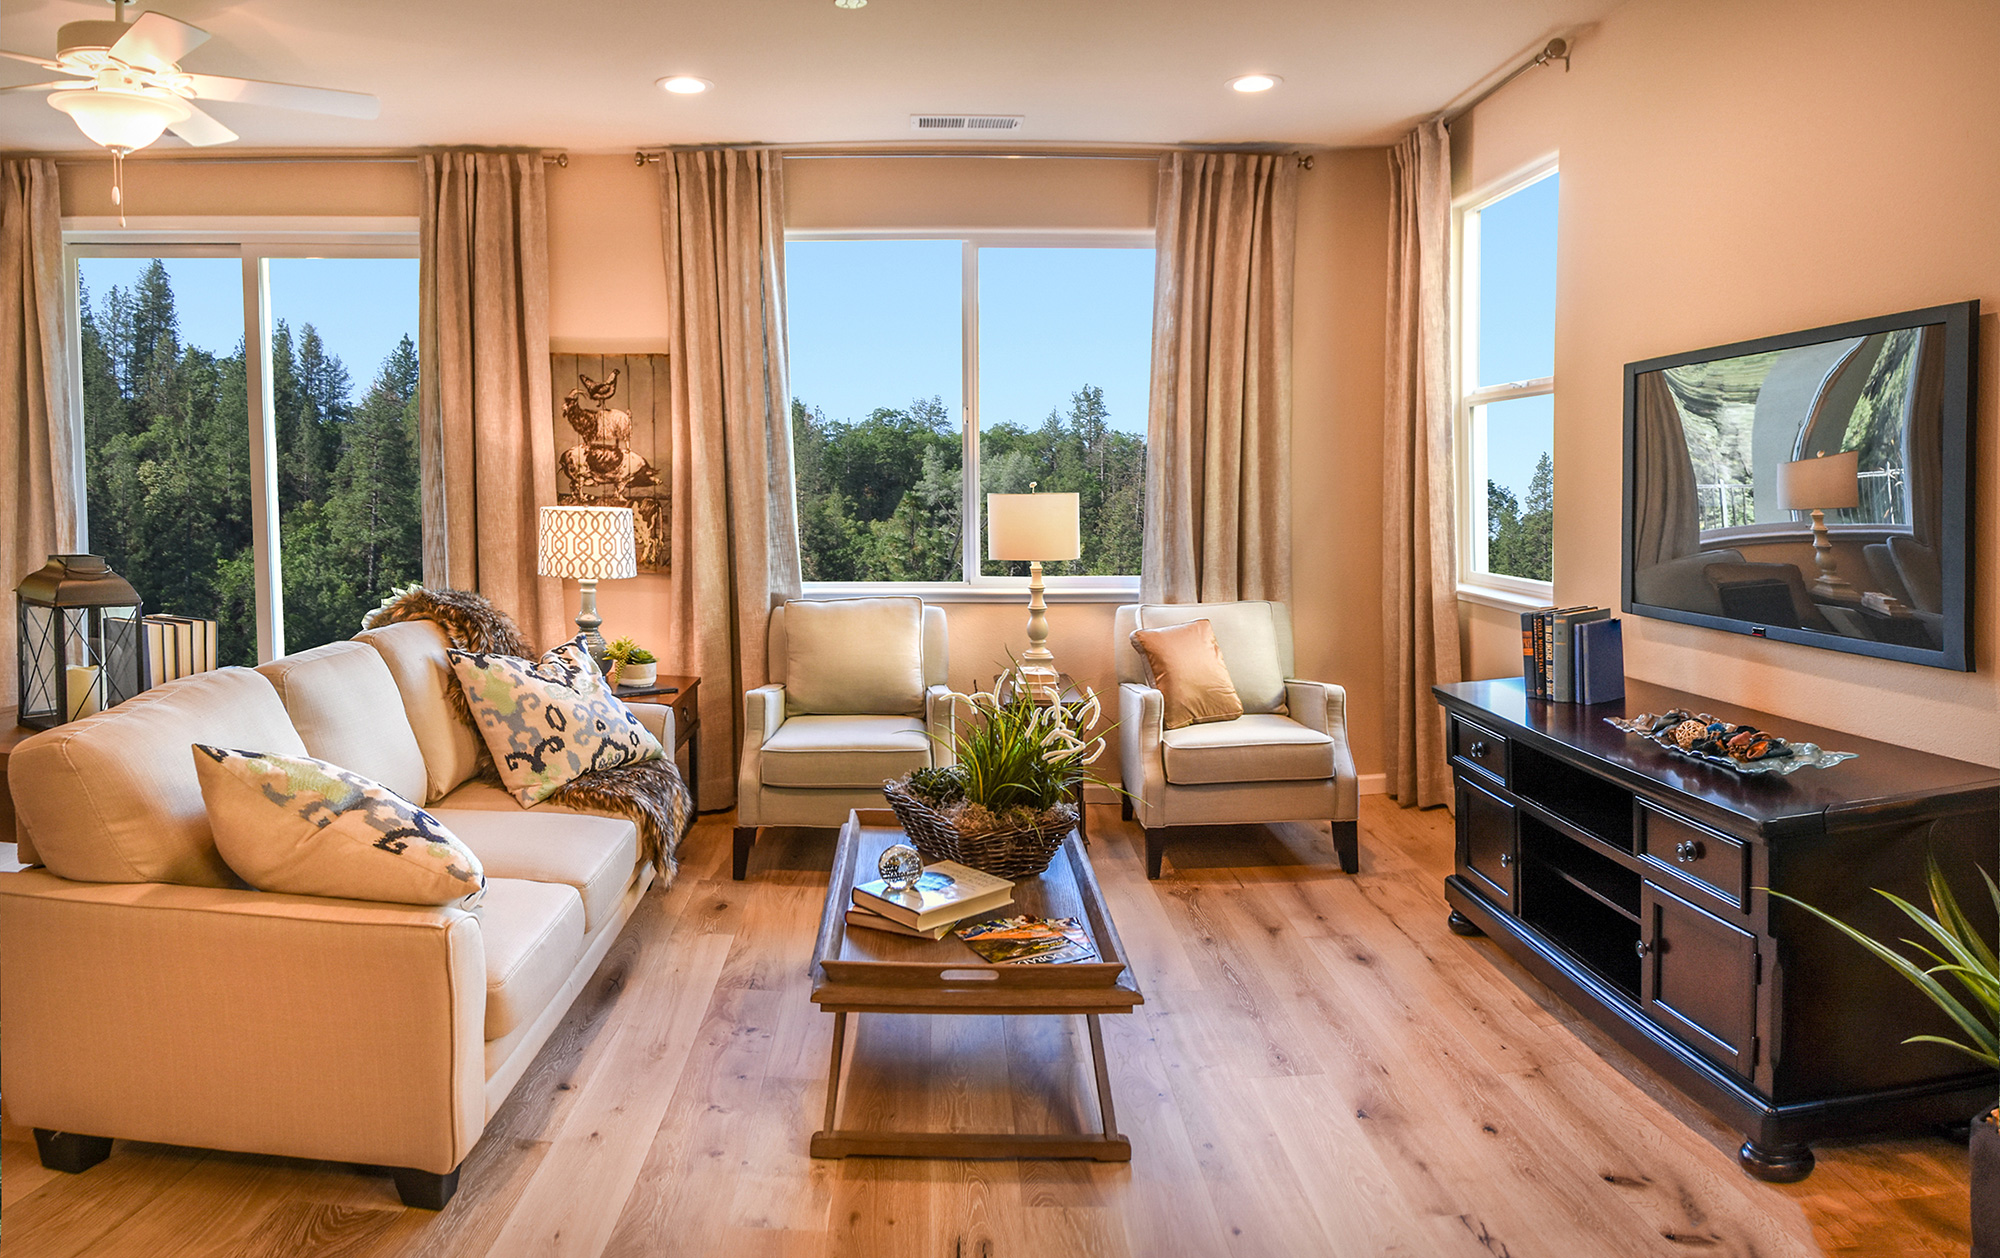 Seniors Find Low Maintenance Taken to a New Level at Silverado Villages